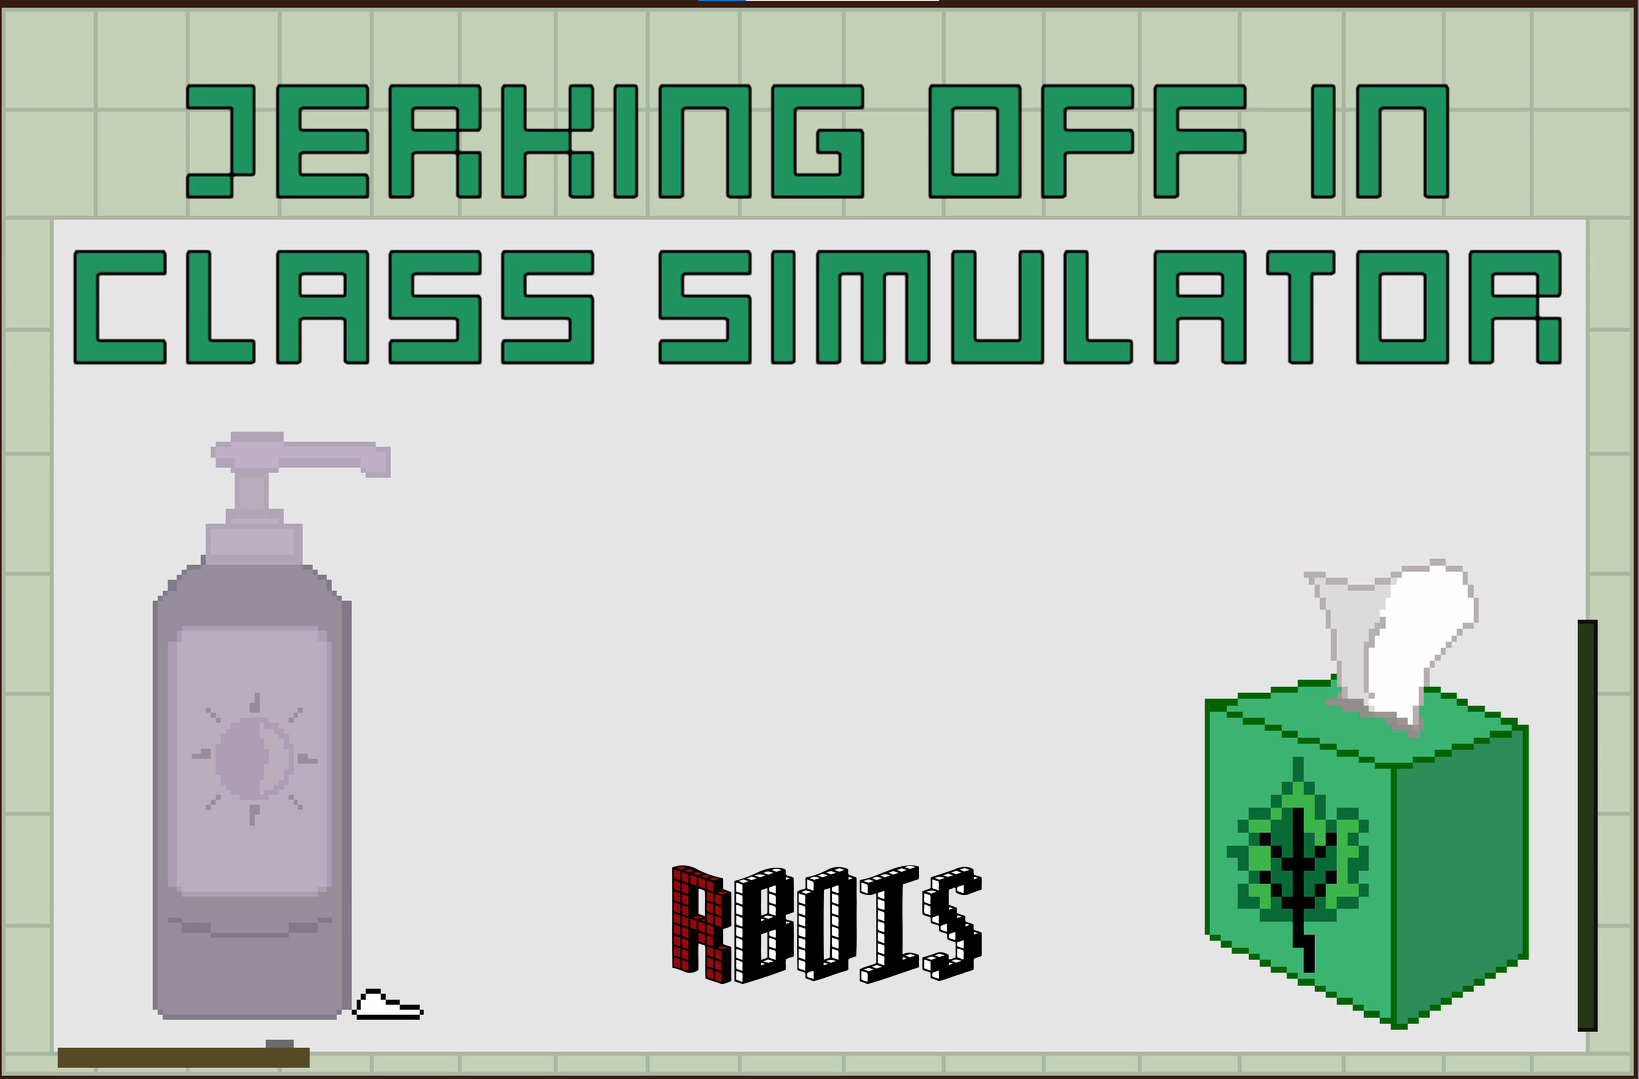 1639px x 1079px - Jerking Off In Class Simulator [COMPLETED] - free game download, reviews,  mega - xGames